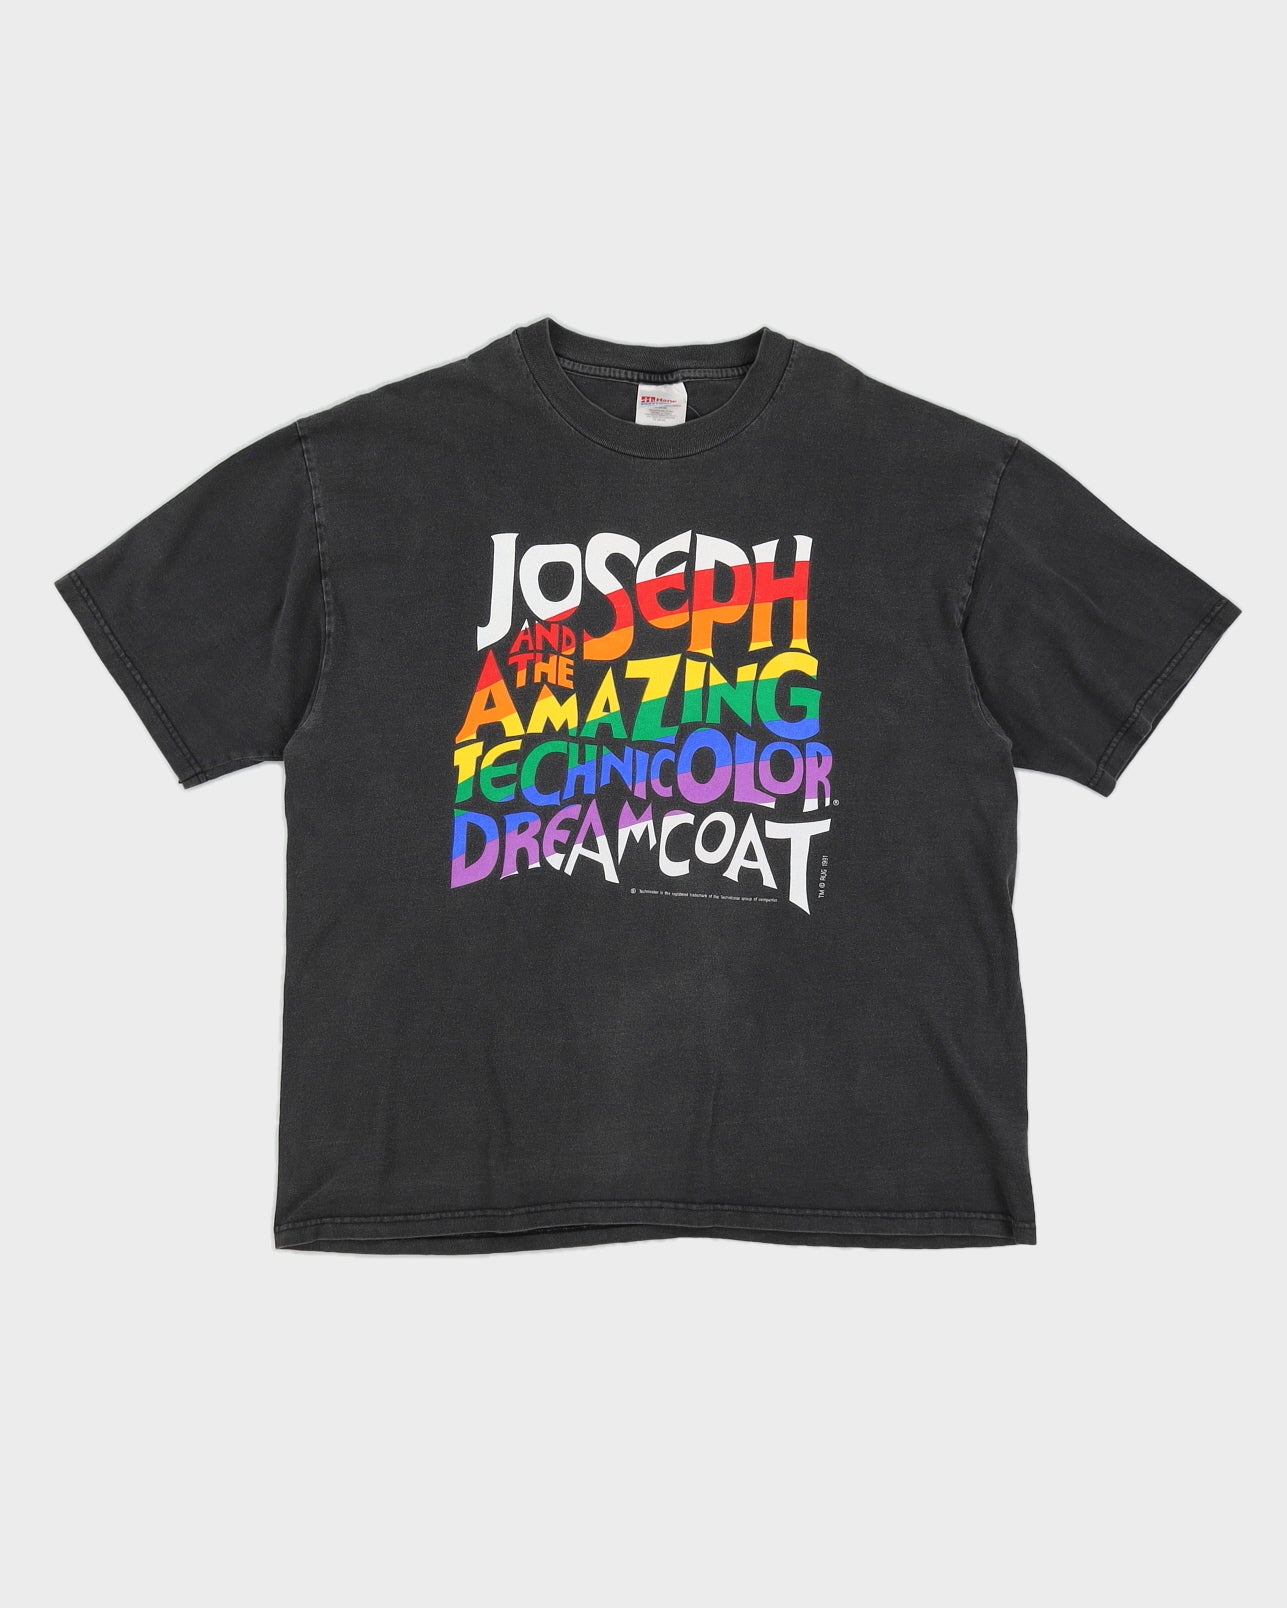 '91 Joseph And The Amazing Technicolor Dreamcoat T-Shirt - XL